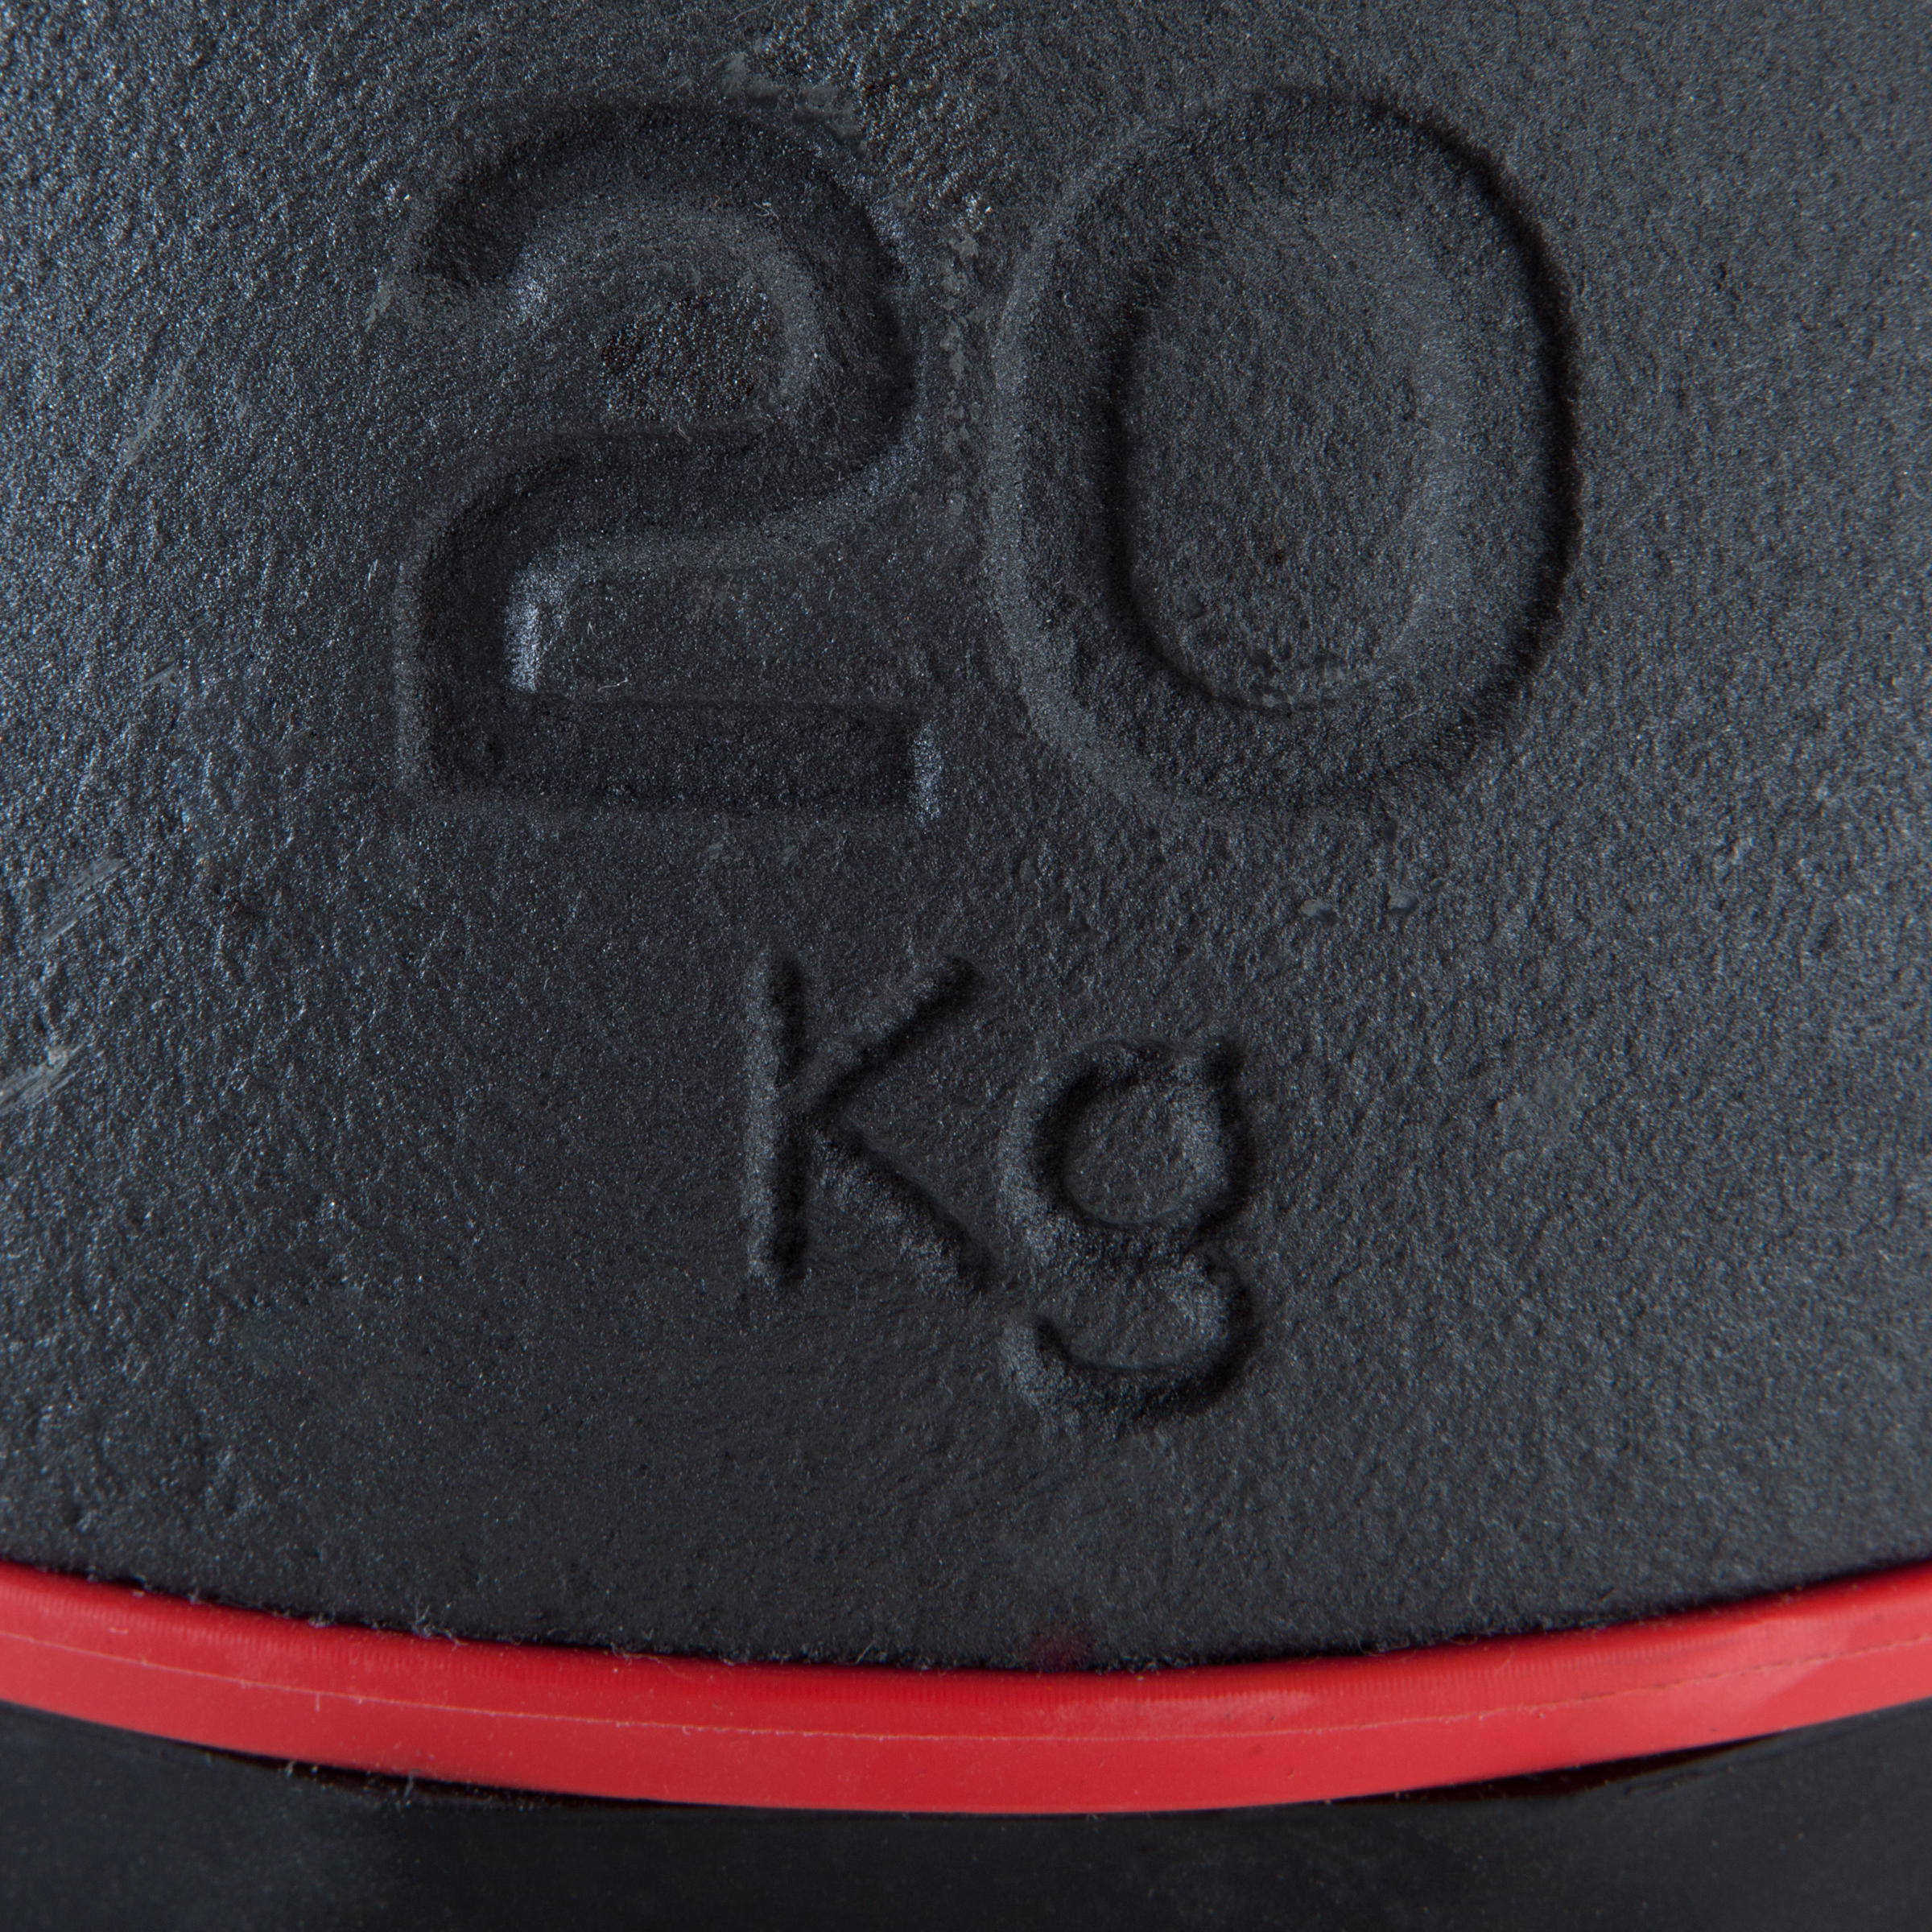 Cast Iron Kettlebell with Rubber Base - 20 kg 6/9